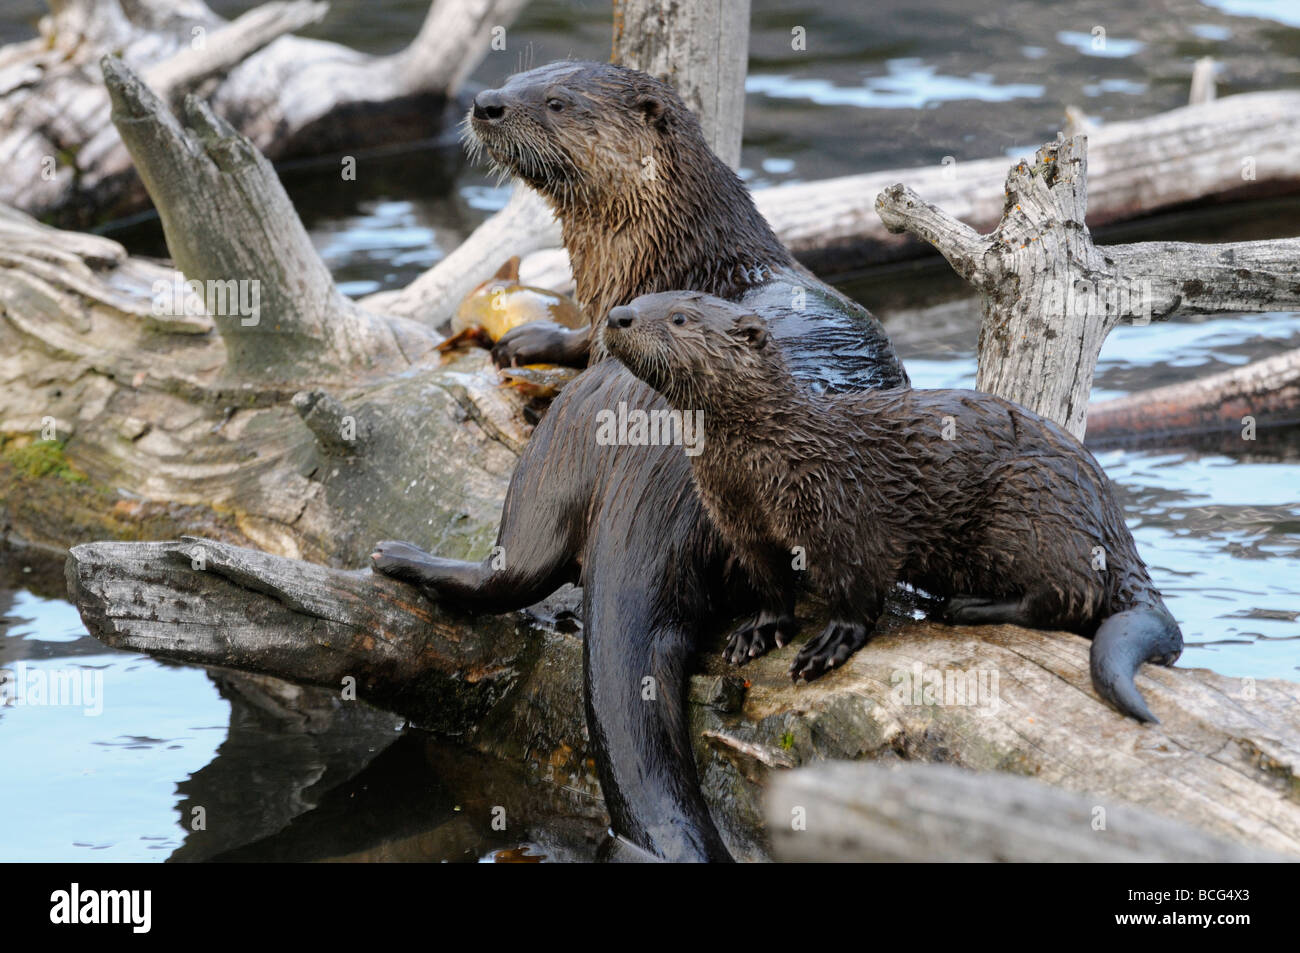 Stock photo of a river otter mother and pup sitting on a log in a pond, Yellowstone National Park, USA, 2009. Stock Photo